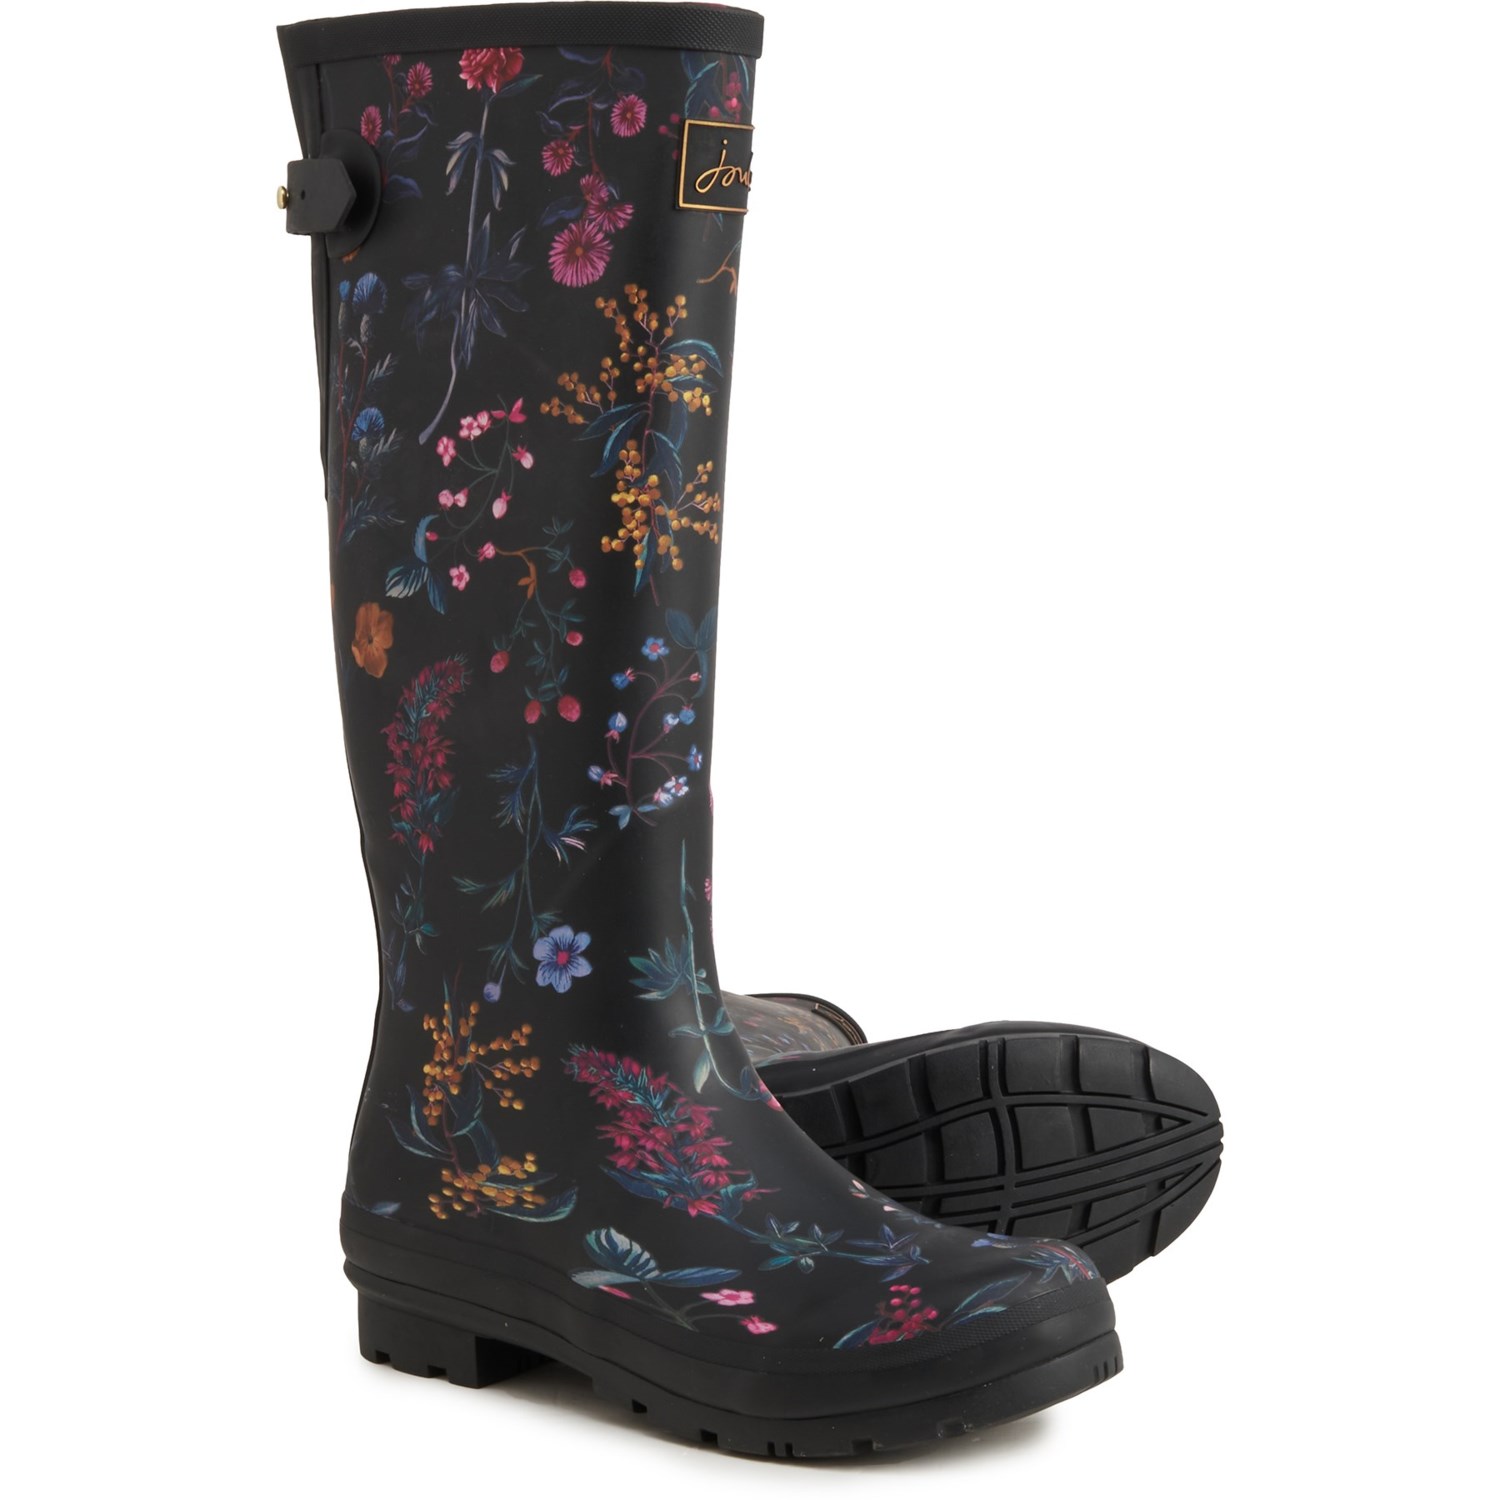 Unpretentious Thriller content Joules Welly Print Tall Rain Boots (For Women) - Save 63%